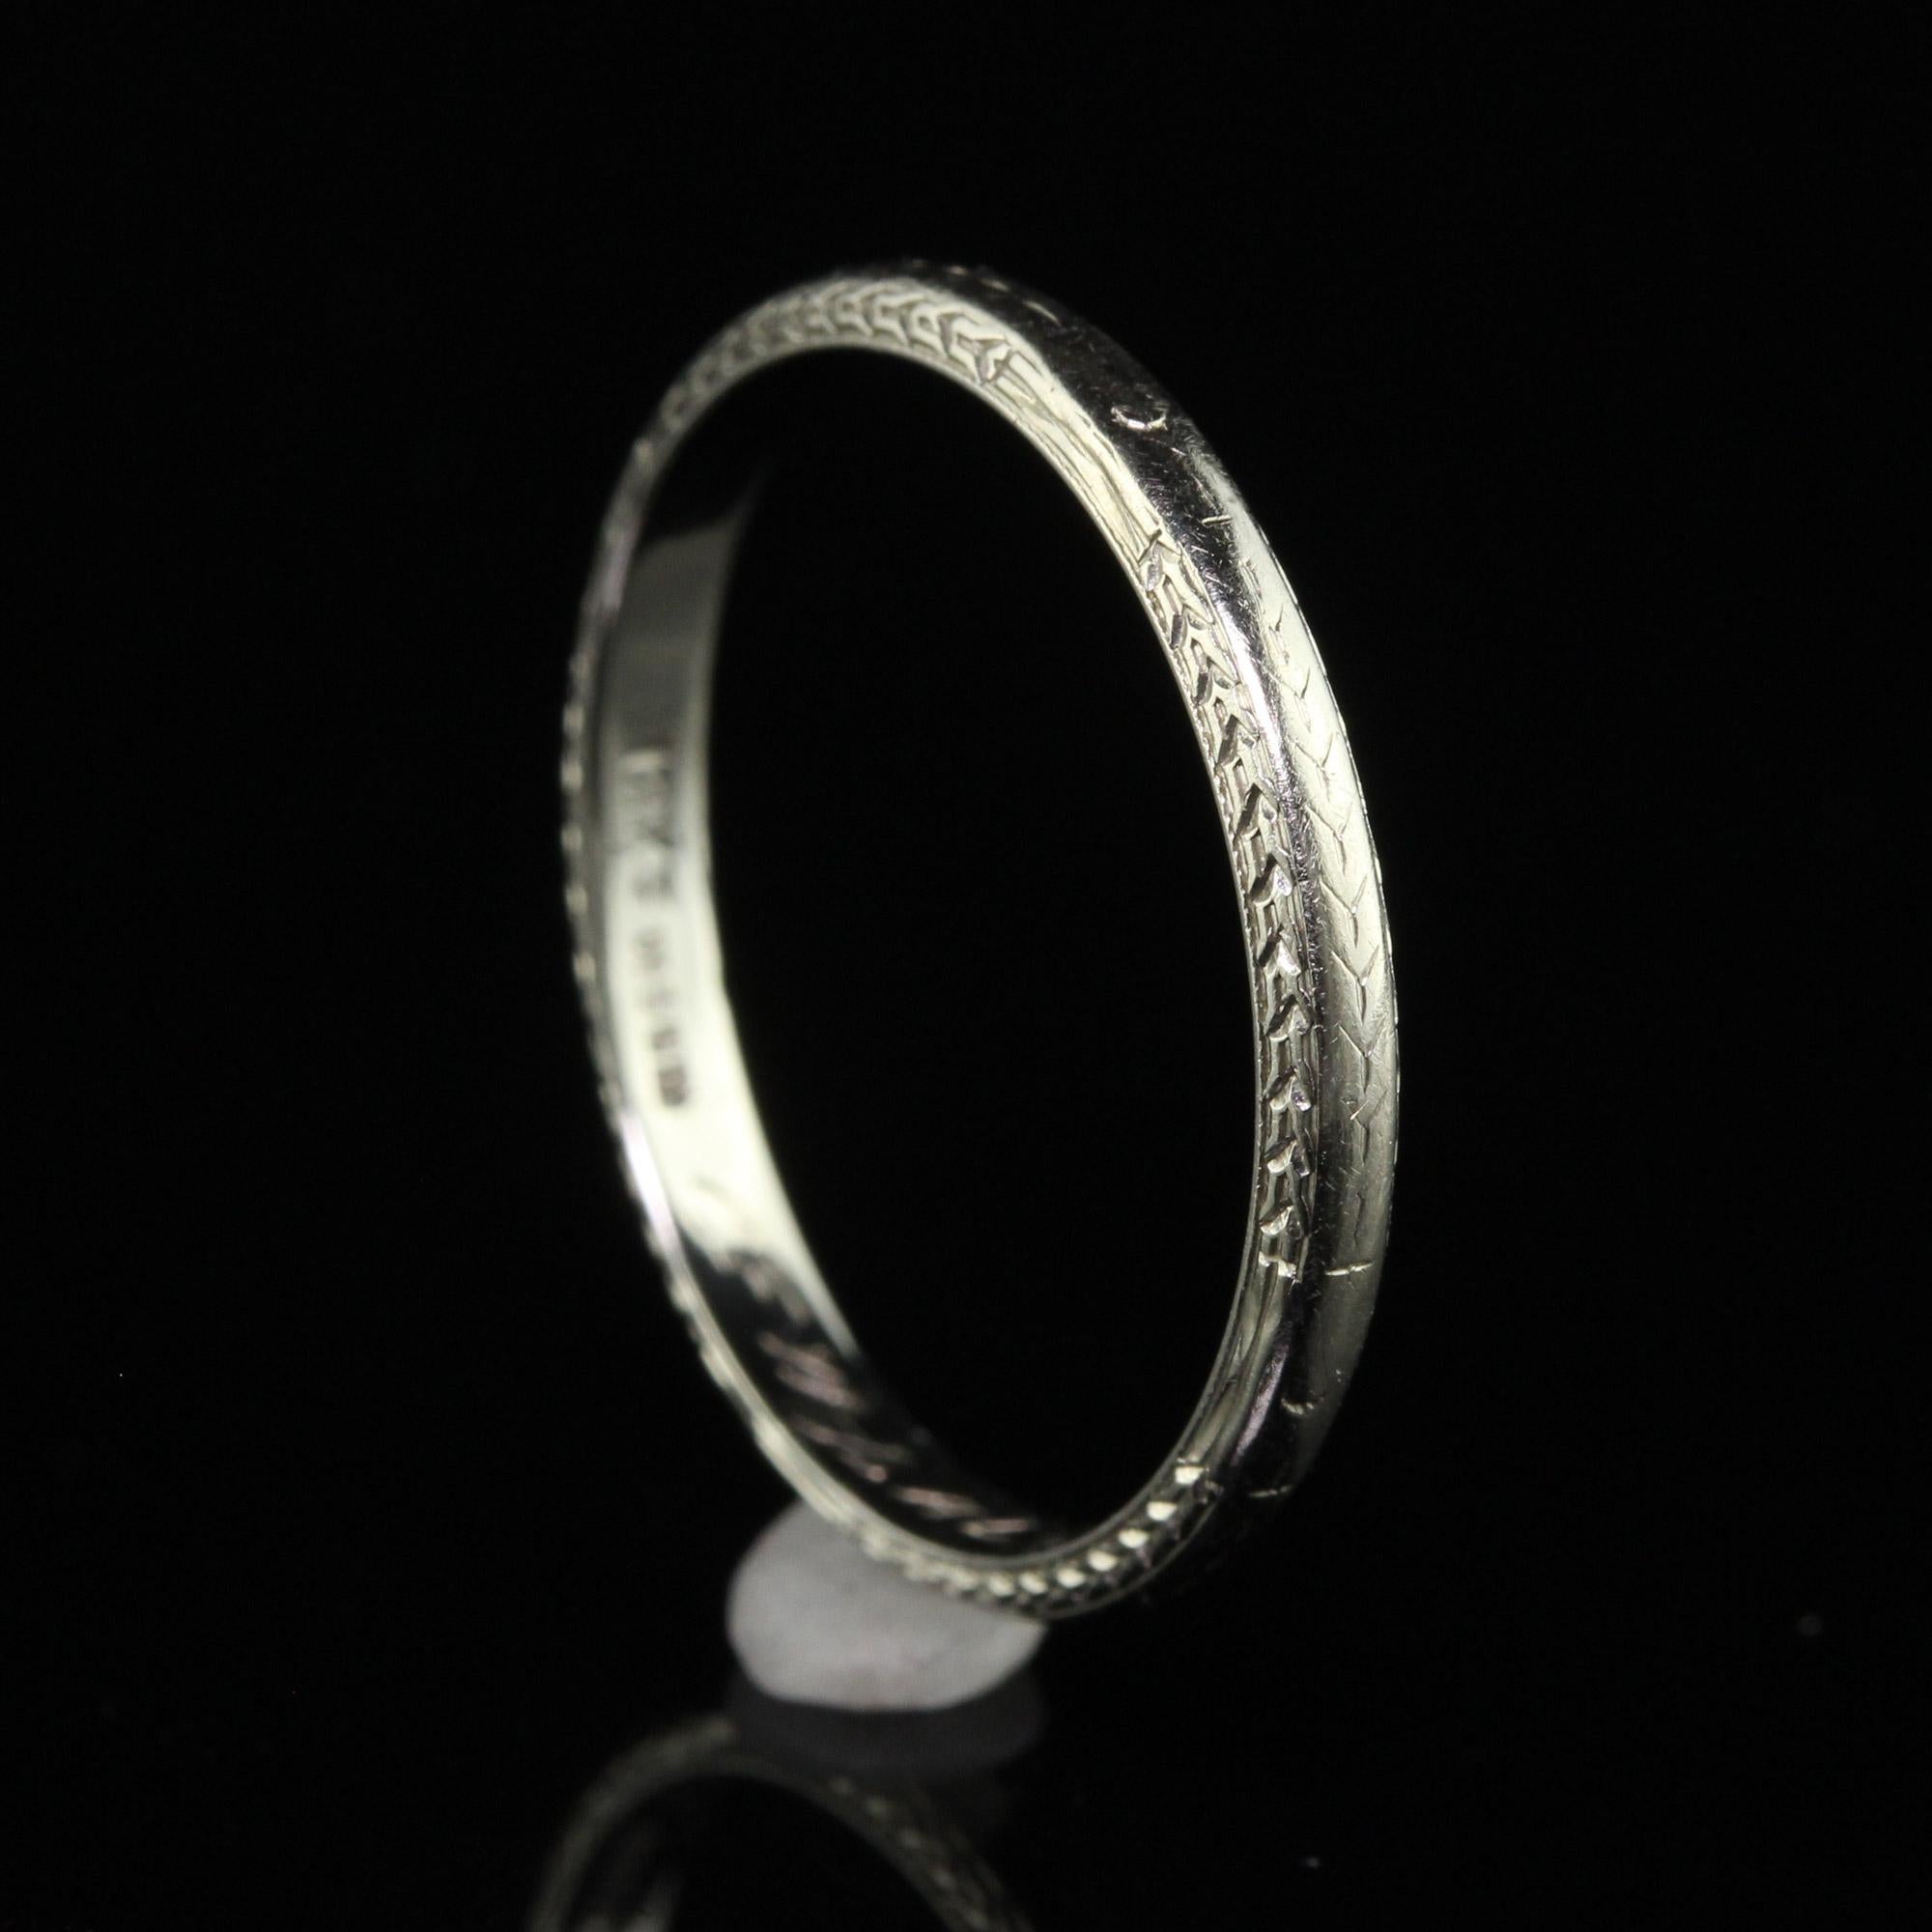 Antique Art Deco Wood and Sons 18K White Gold Engraved Wedding Band - Size 8 For Sale 2